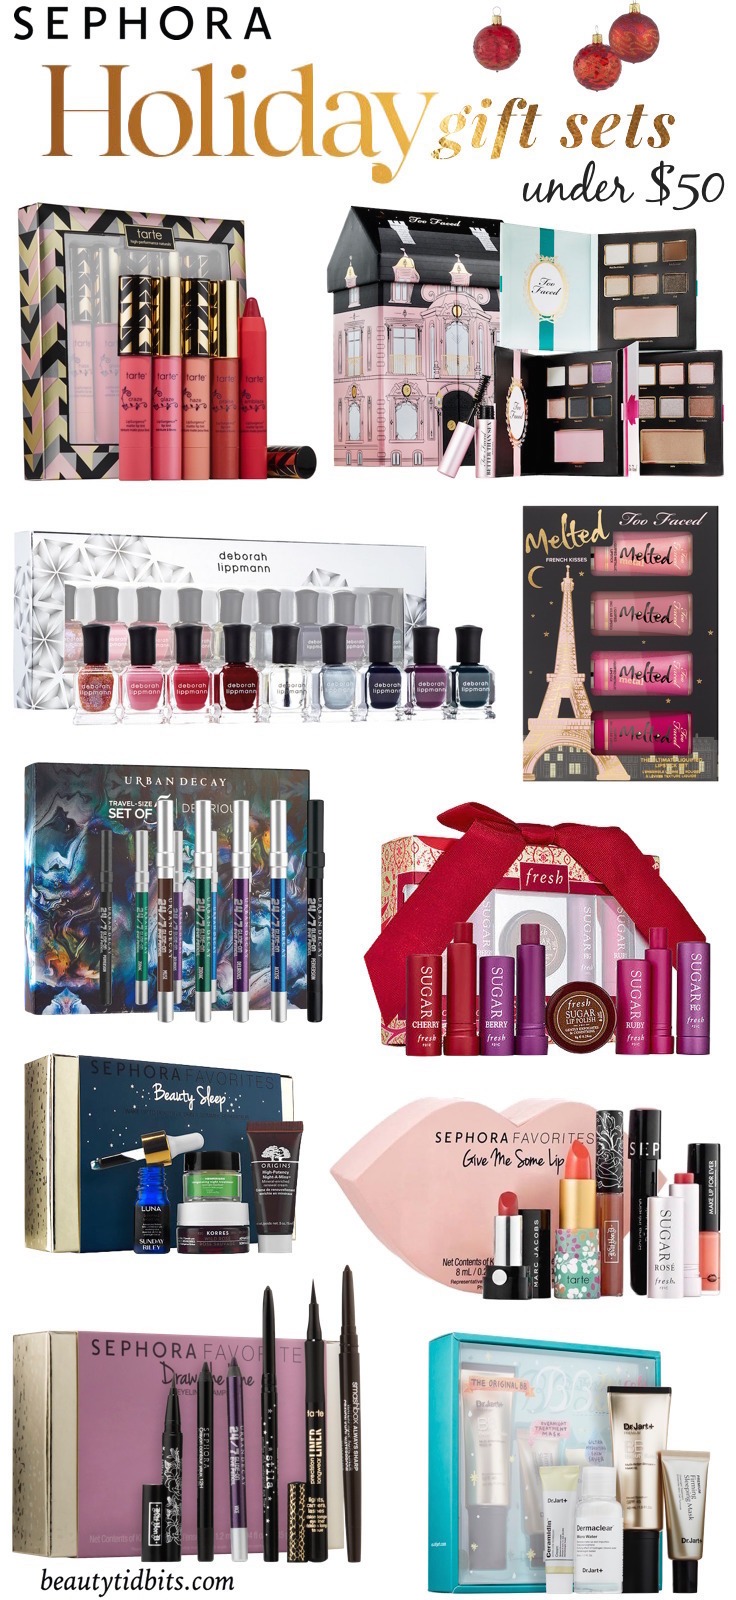 Here's a list of the best Sephora holiday 2015 gift sets under $50!